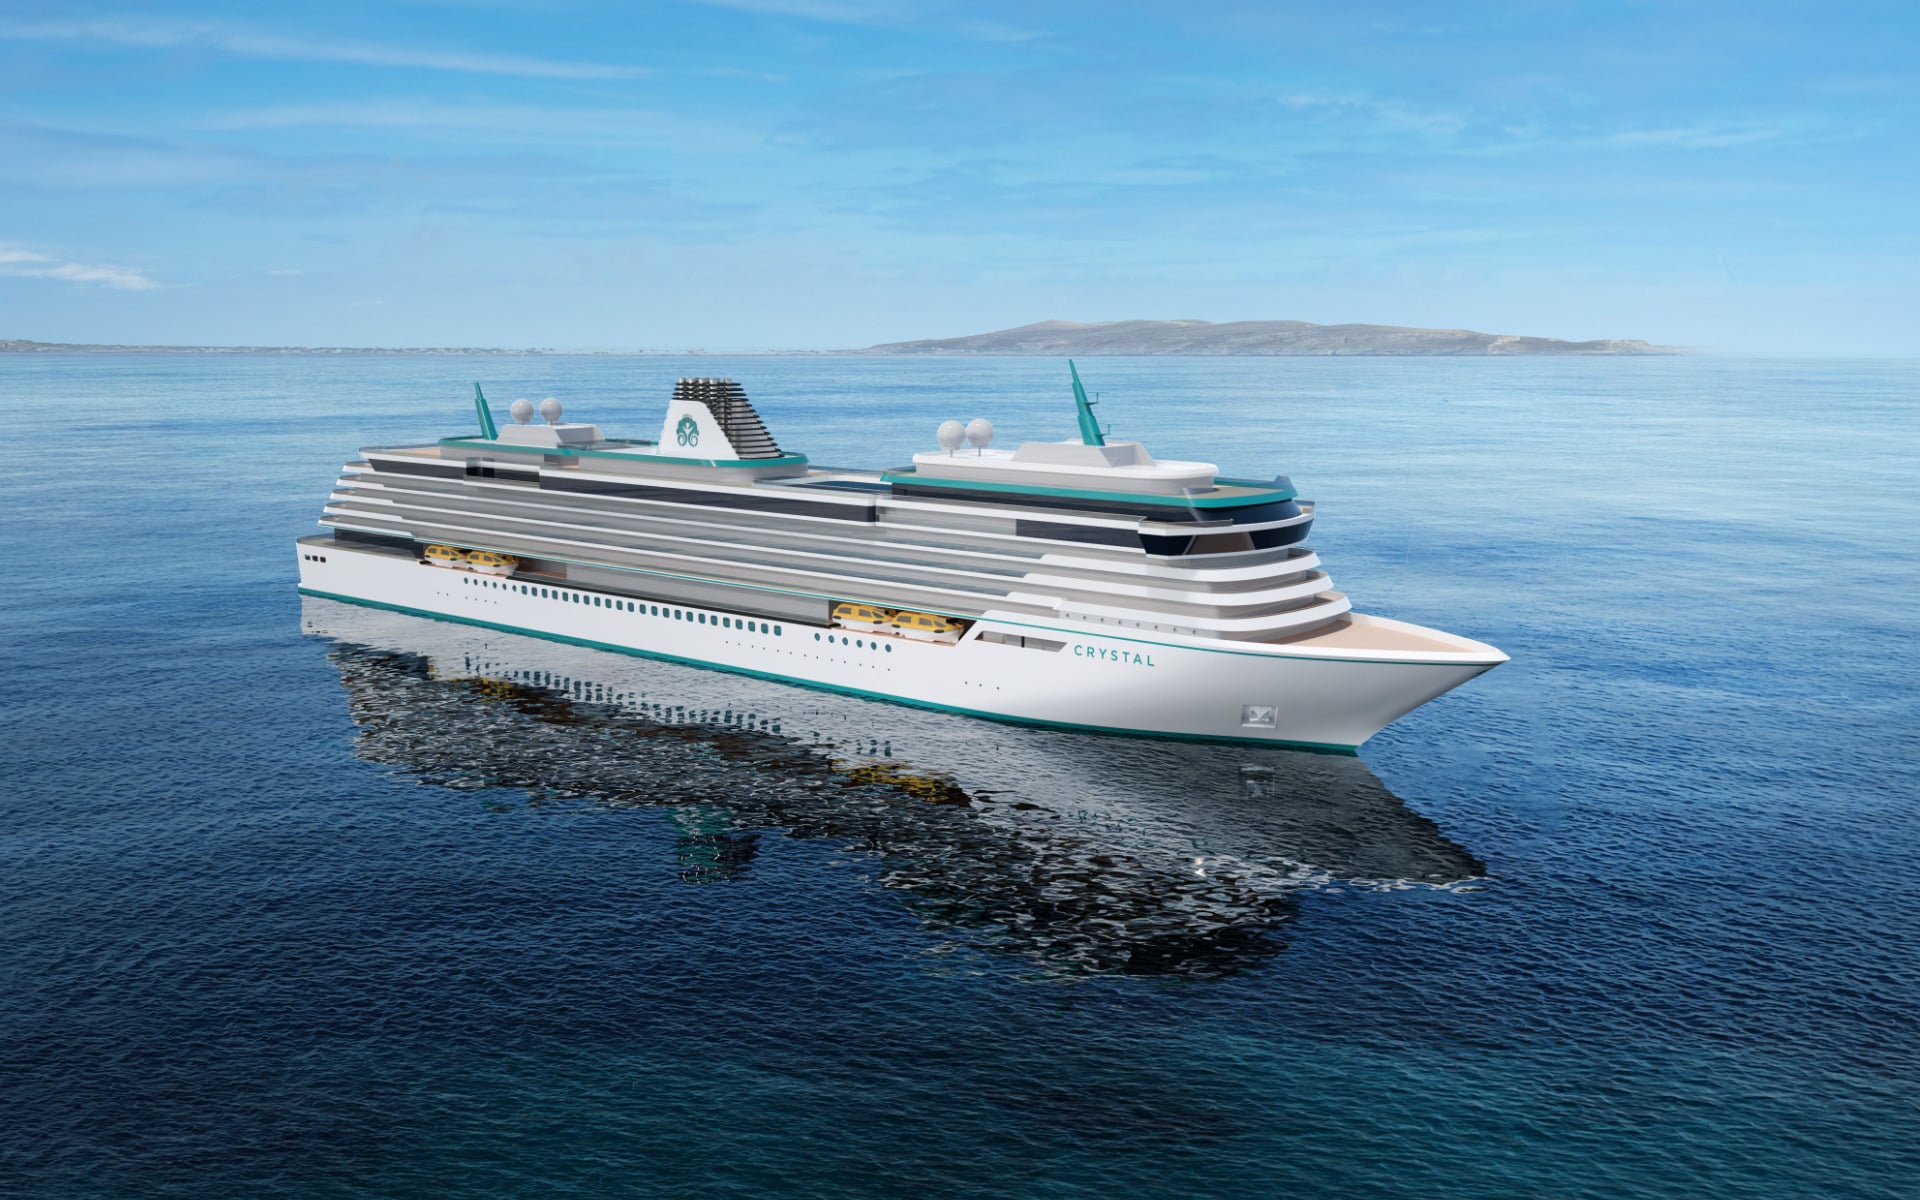 A rendering of the proposed new Crystal cruise ship that will enter service in 2028.